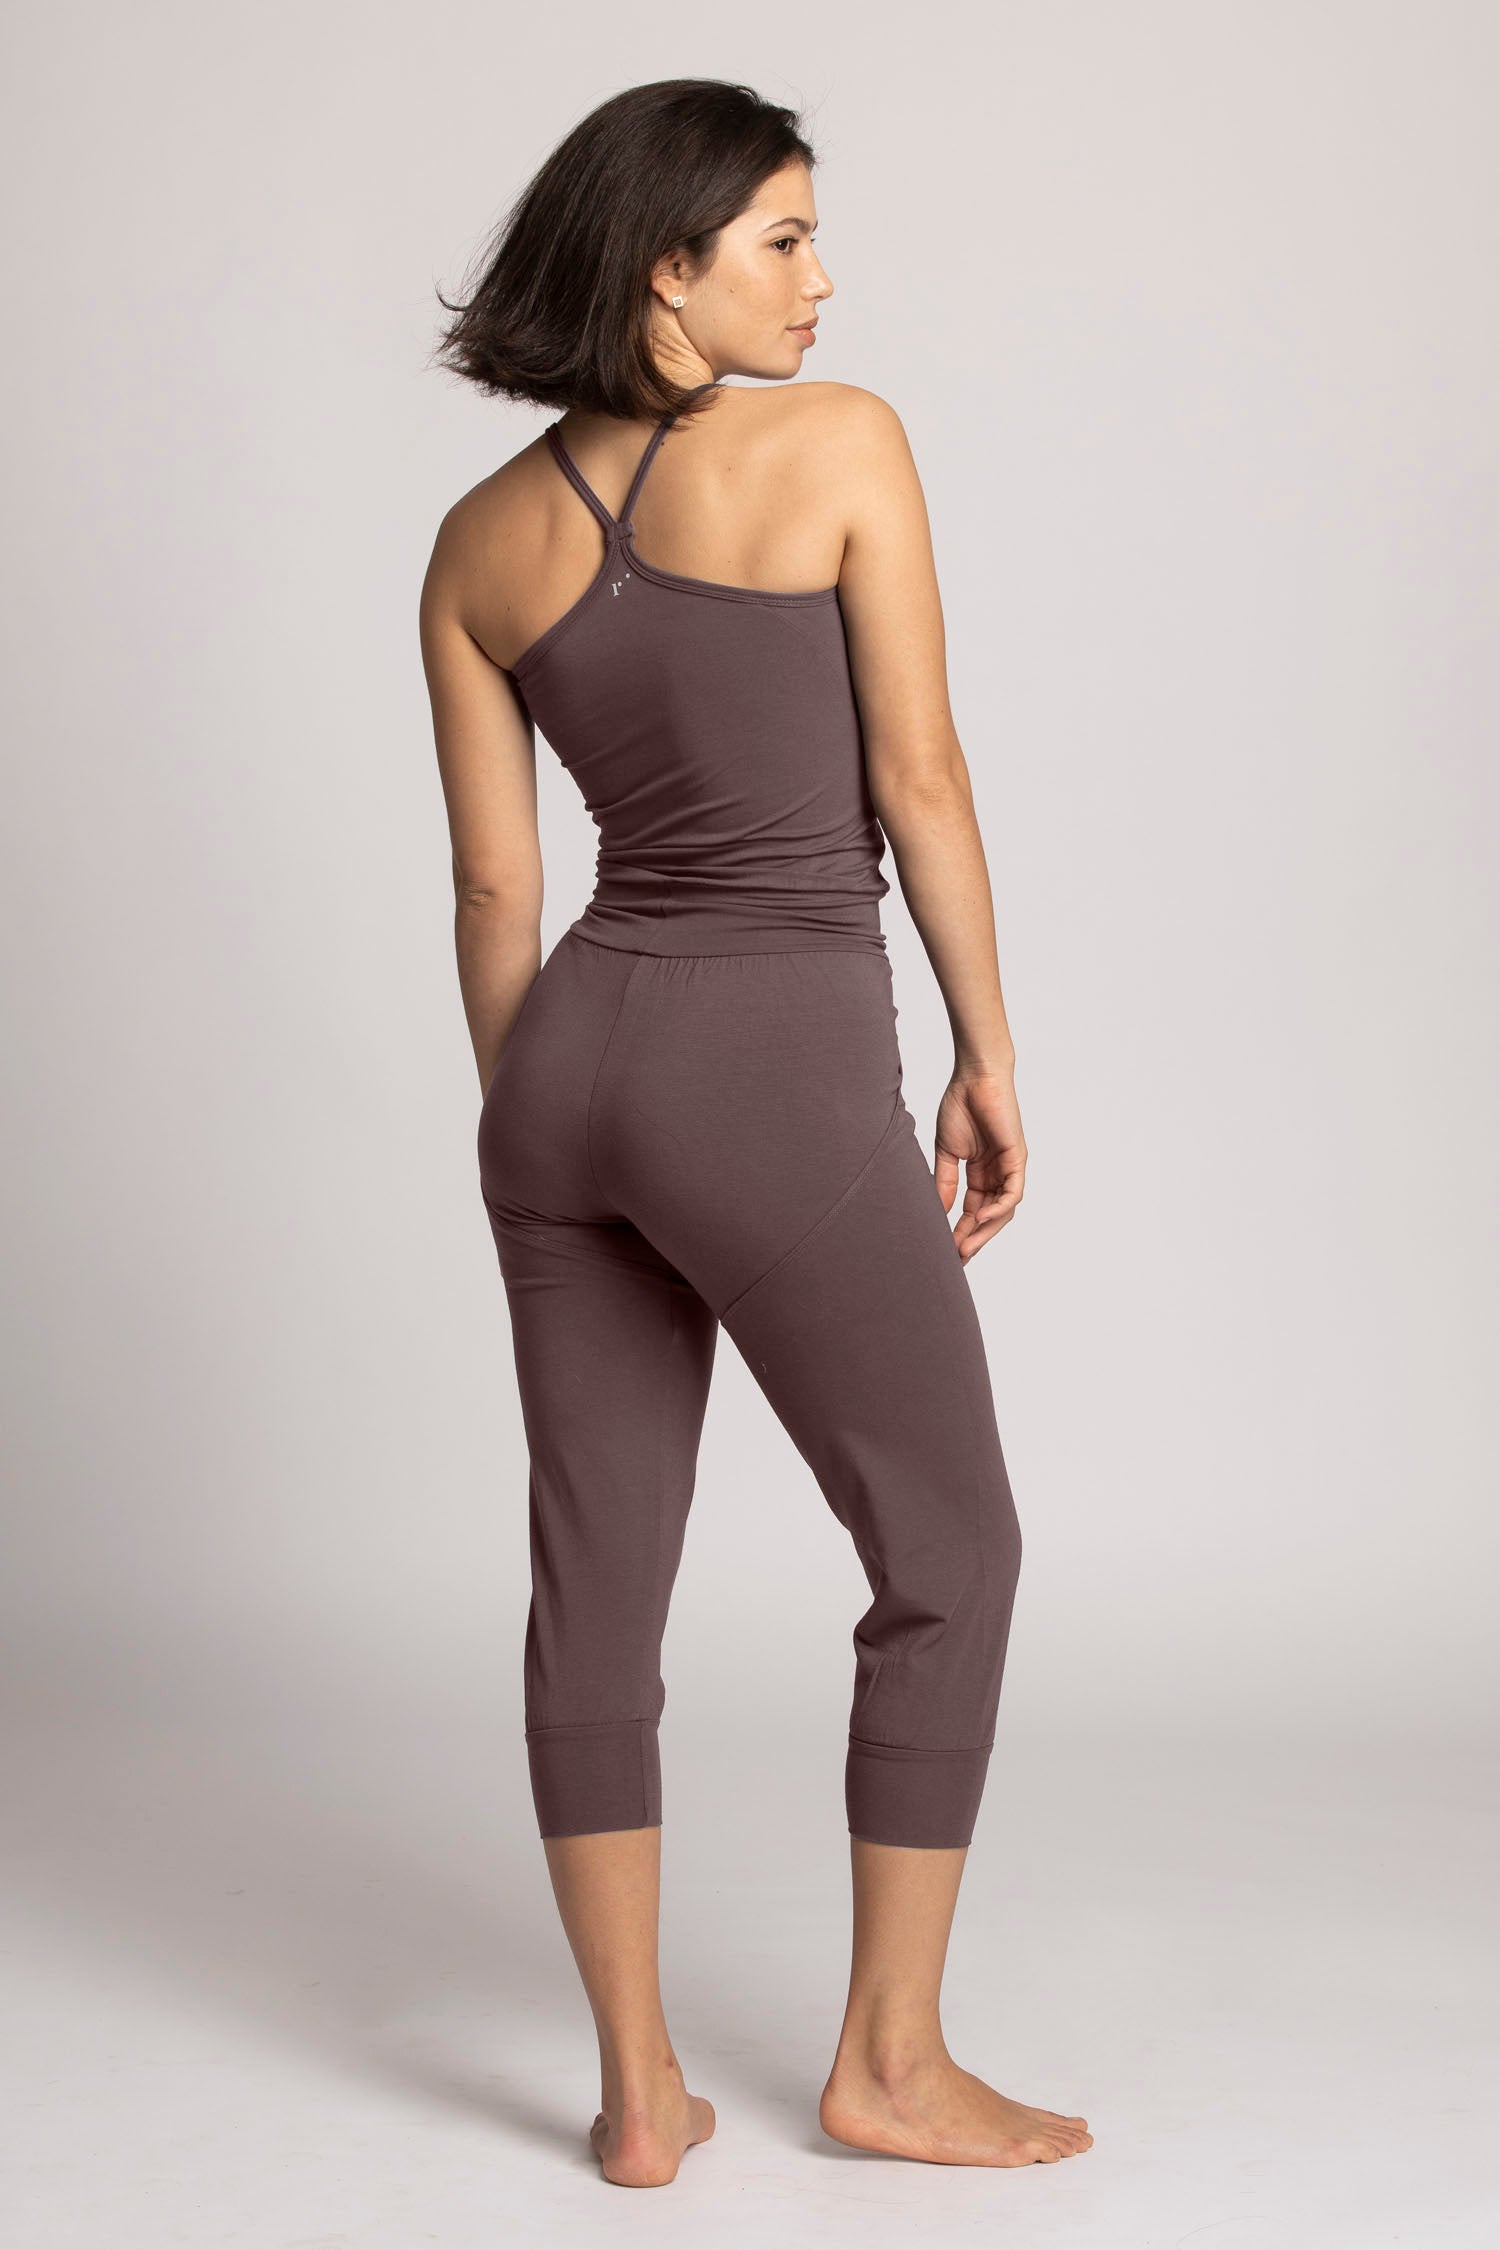 Garnet Yoga Knit Jumpsuit with Pockets - Yoga Clothing by Daughters of  Culture